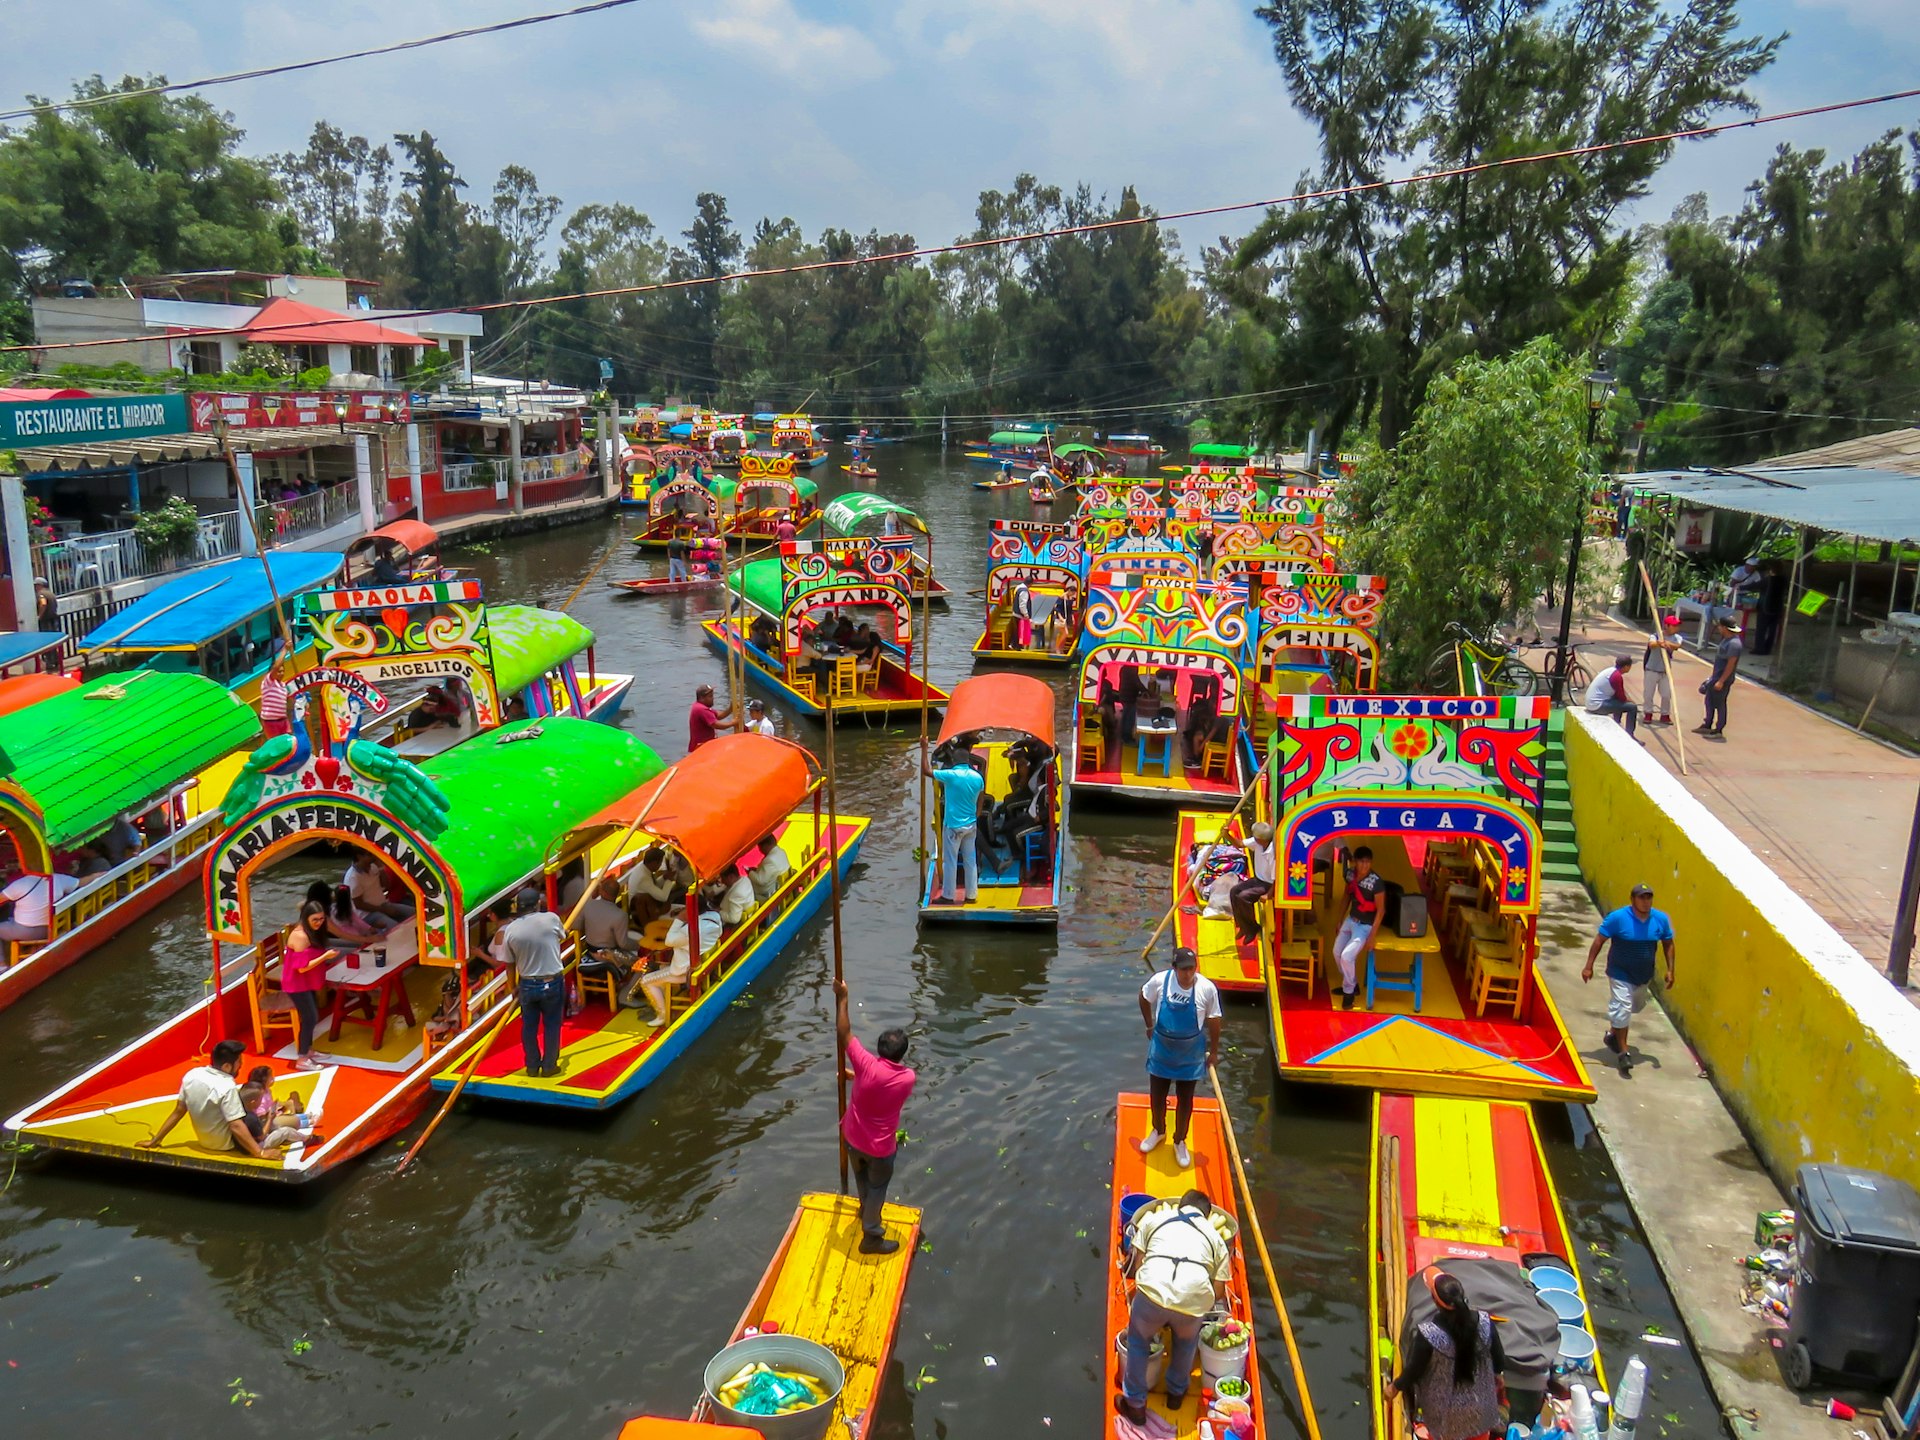 Dozens of brightly painted trajinera gondolas wait to take passengers in the canals of Xochimilco, Mexico City, Mexico